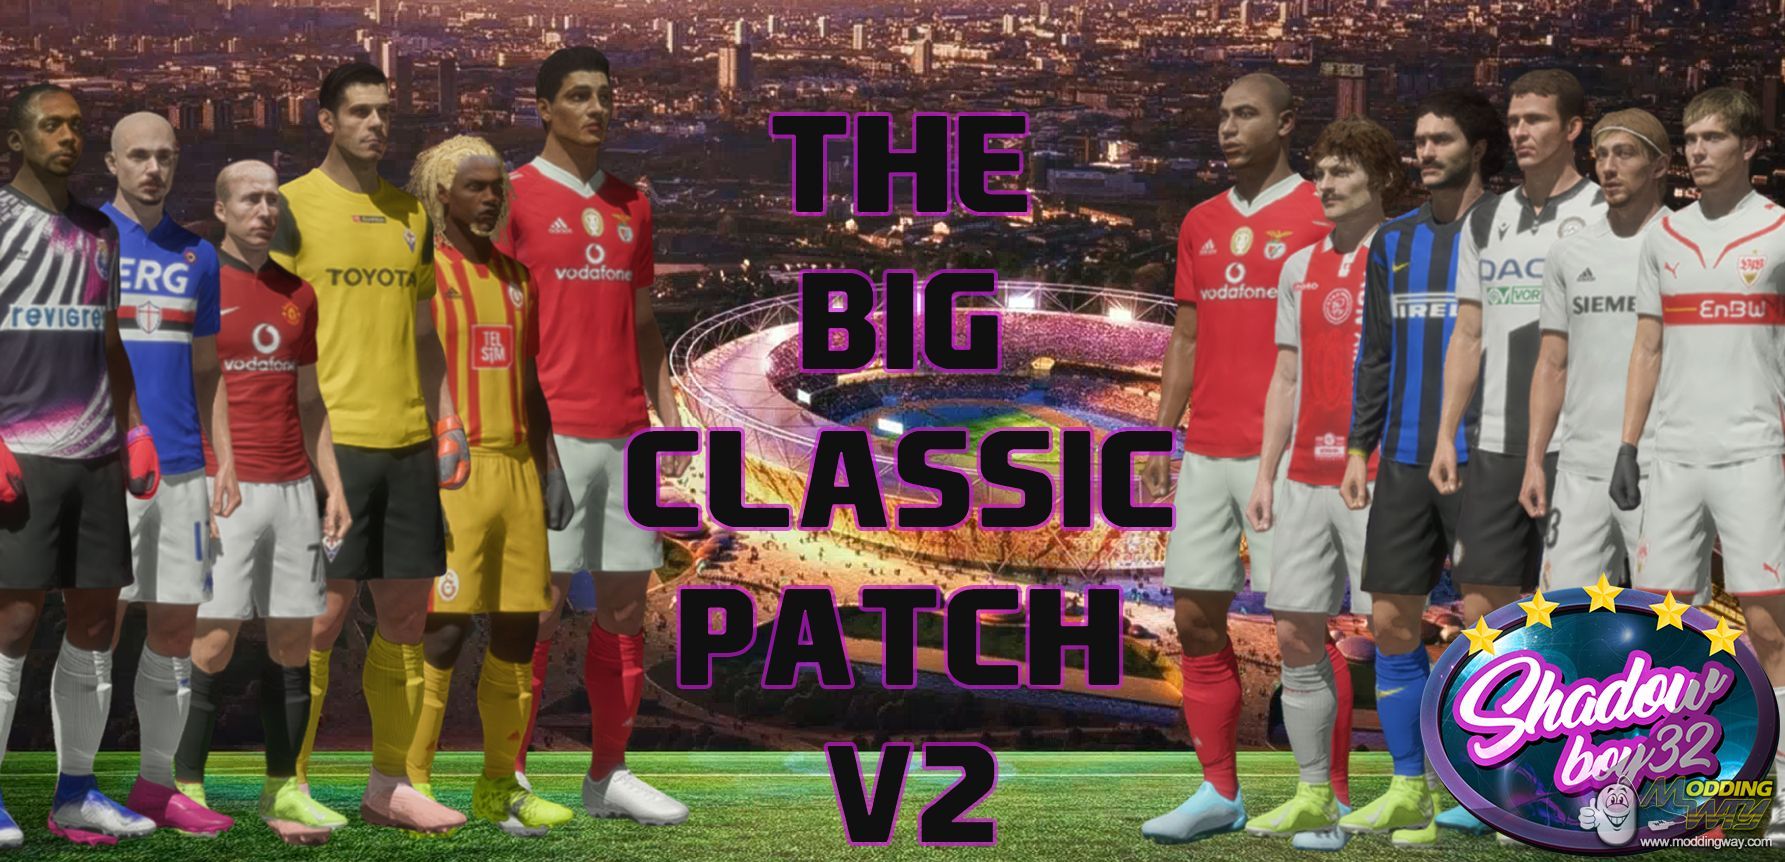 Fifa classic patch